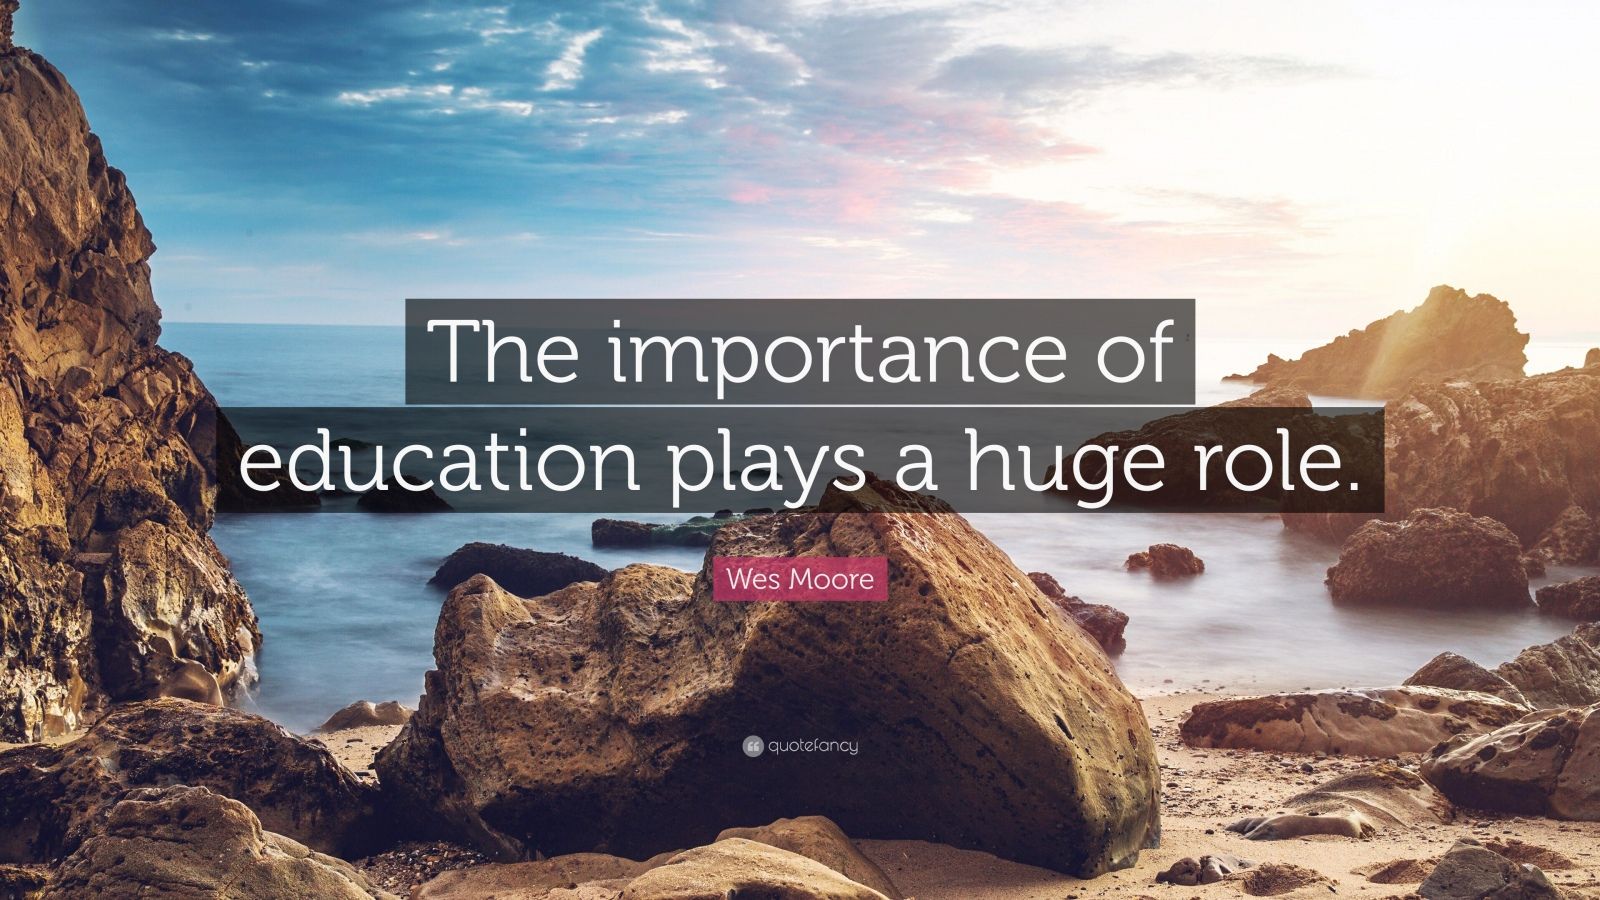 education plays a very important role in our life